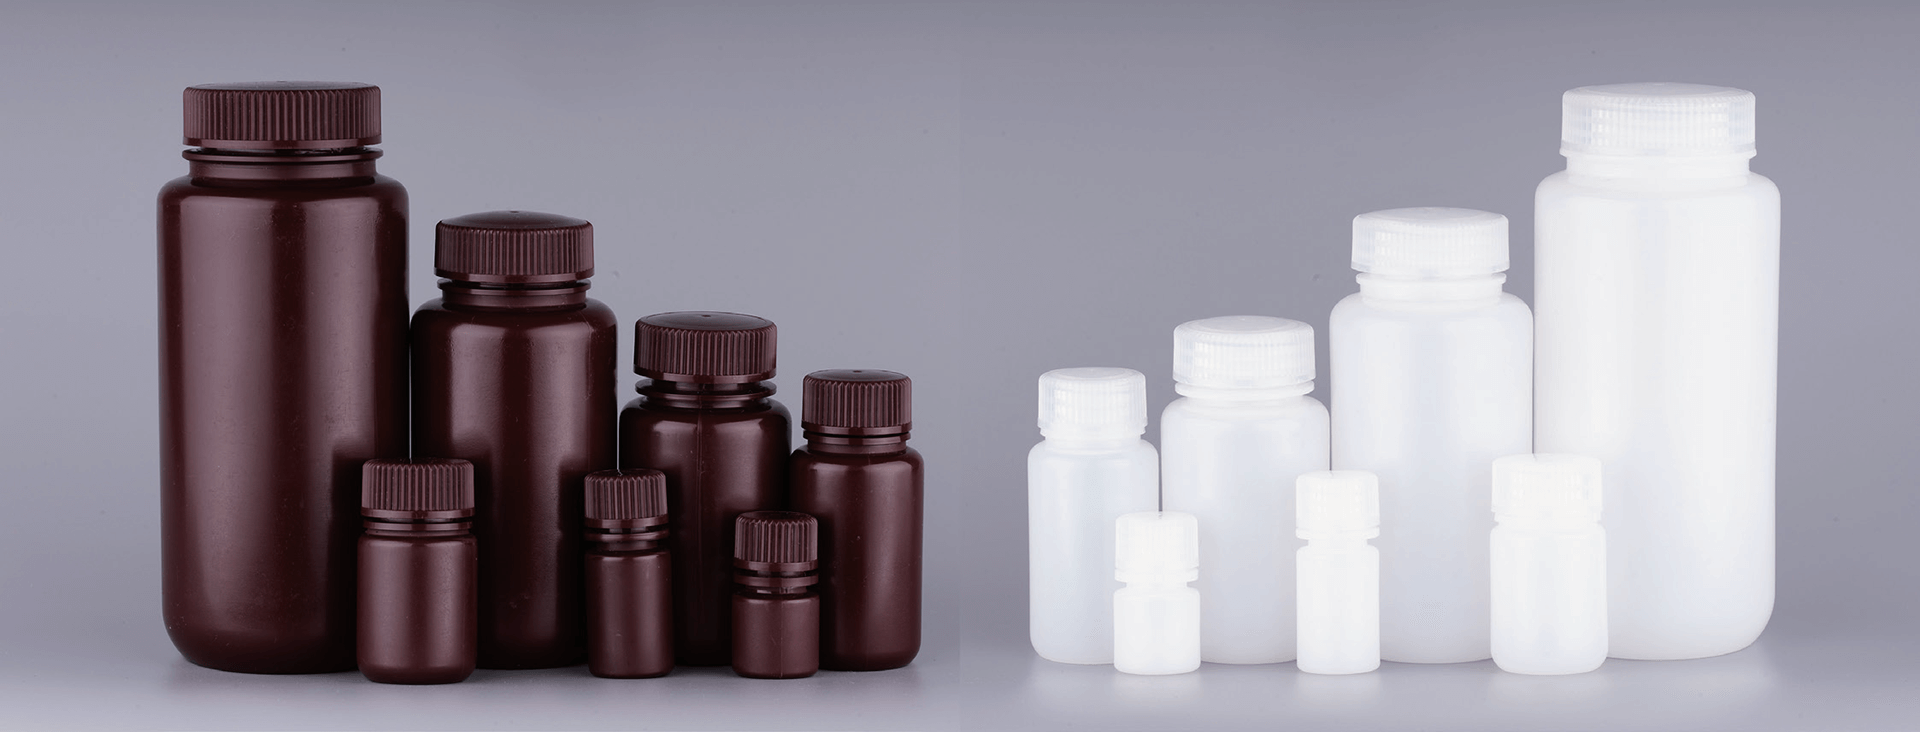 Supplement packaging bottles and jars